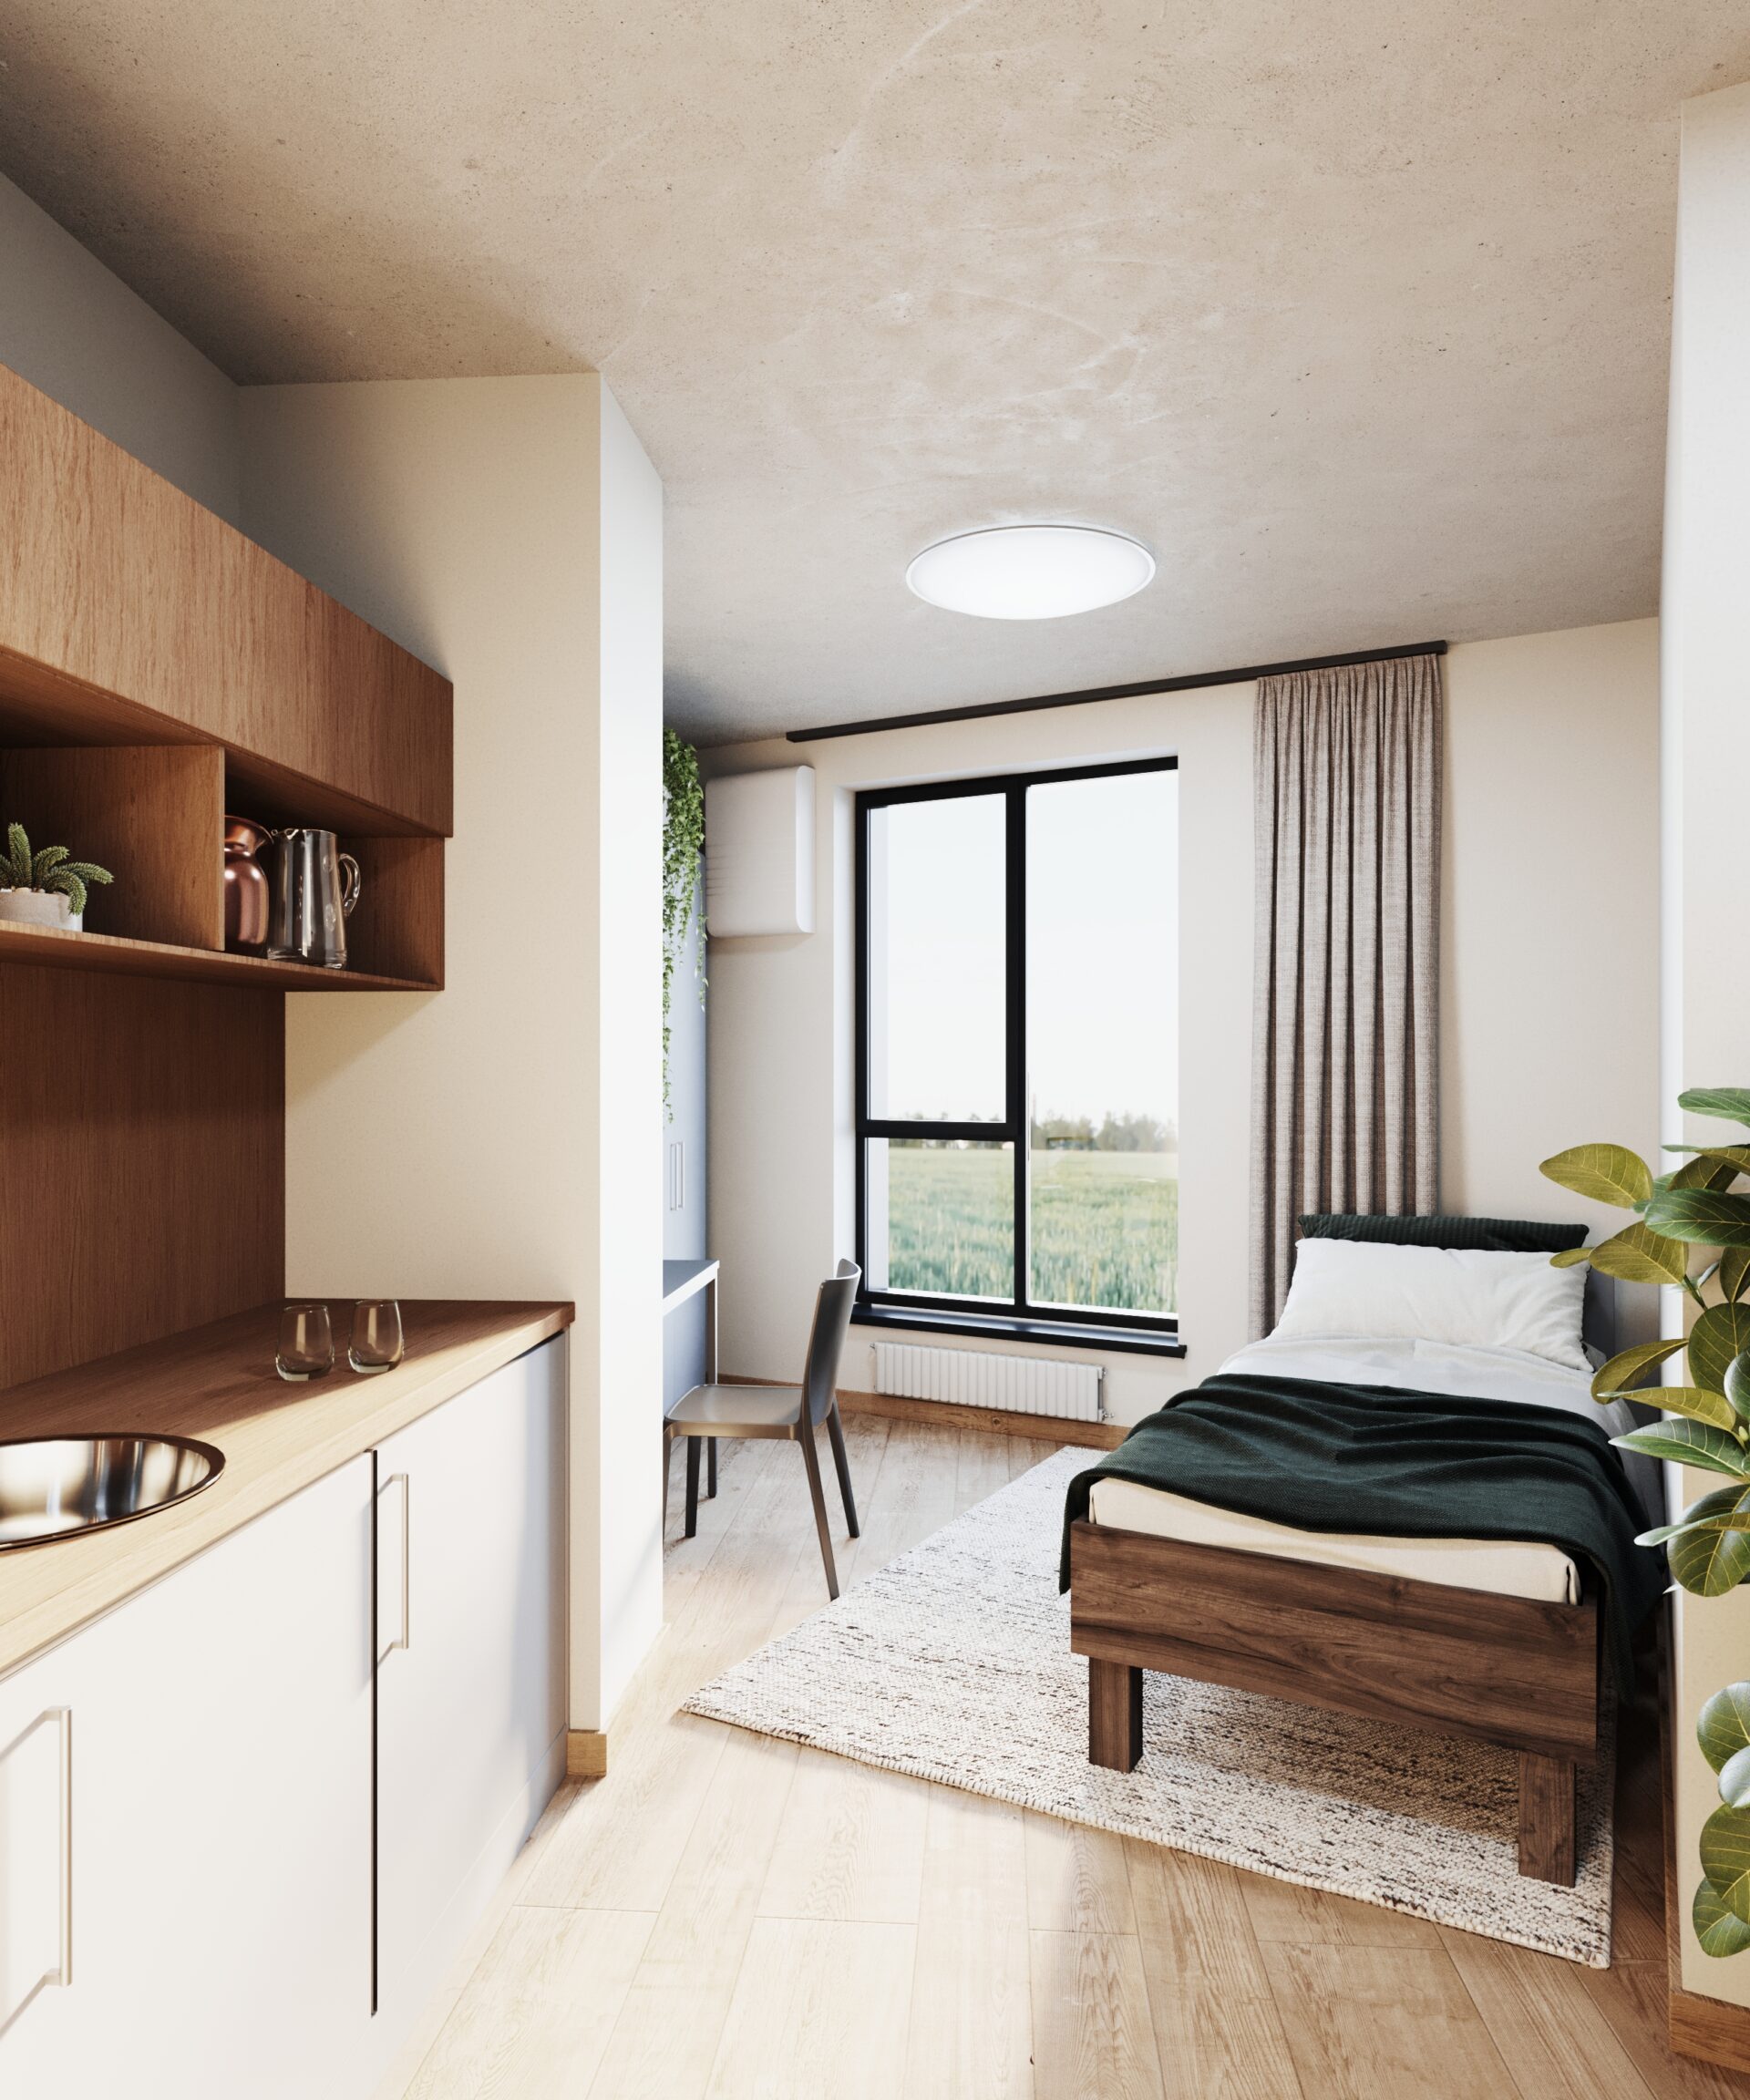 Shed Co-living Riga Accessible Studio